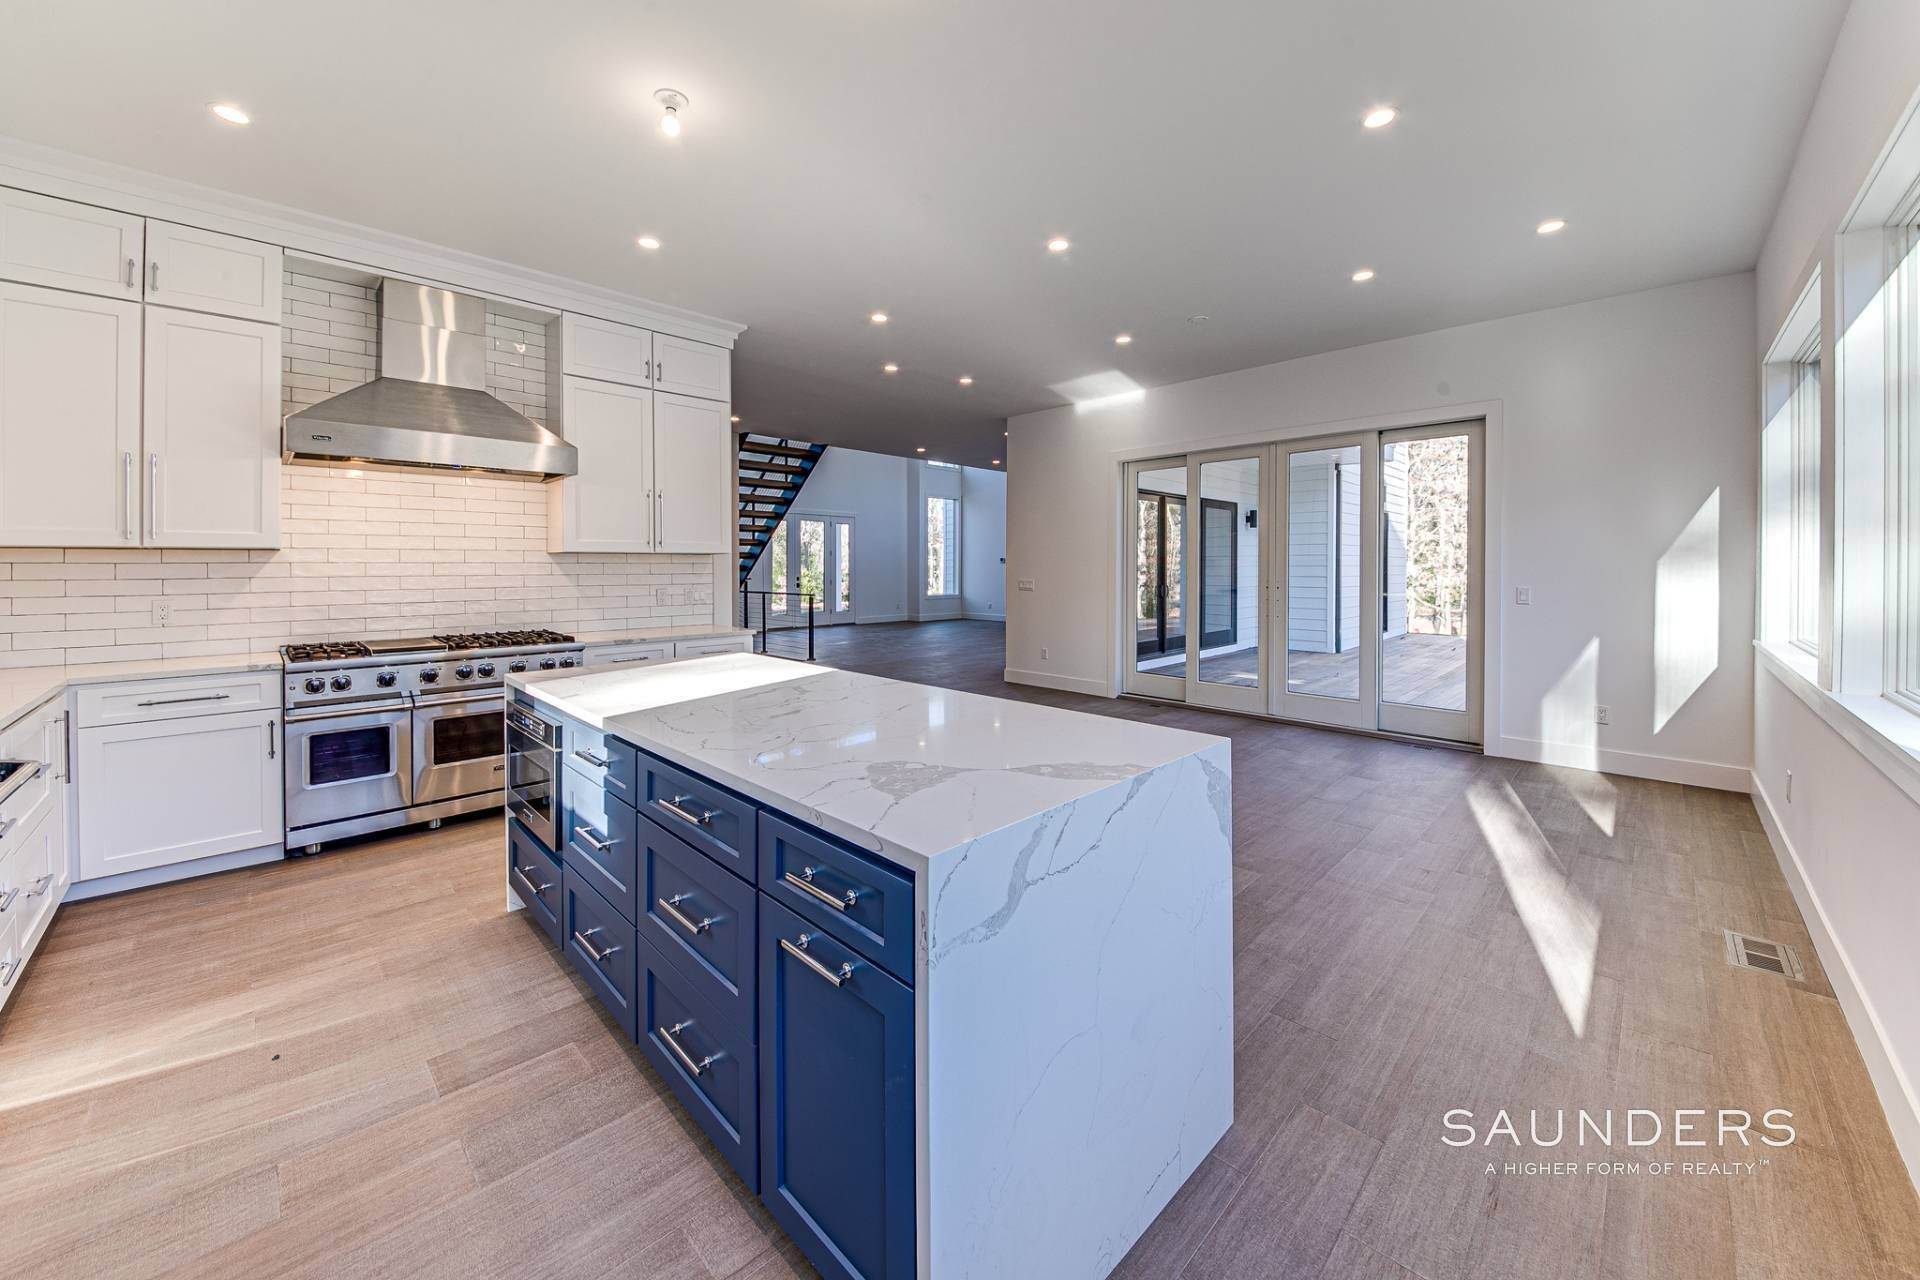 15. Single Family Homes for Sale at Unsurpassed Luxury And Elegance With This Brand New Construction 10 Van Scoys Path, East Hampton, NY 11937